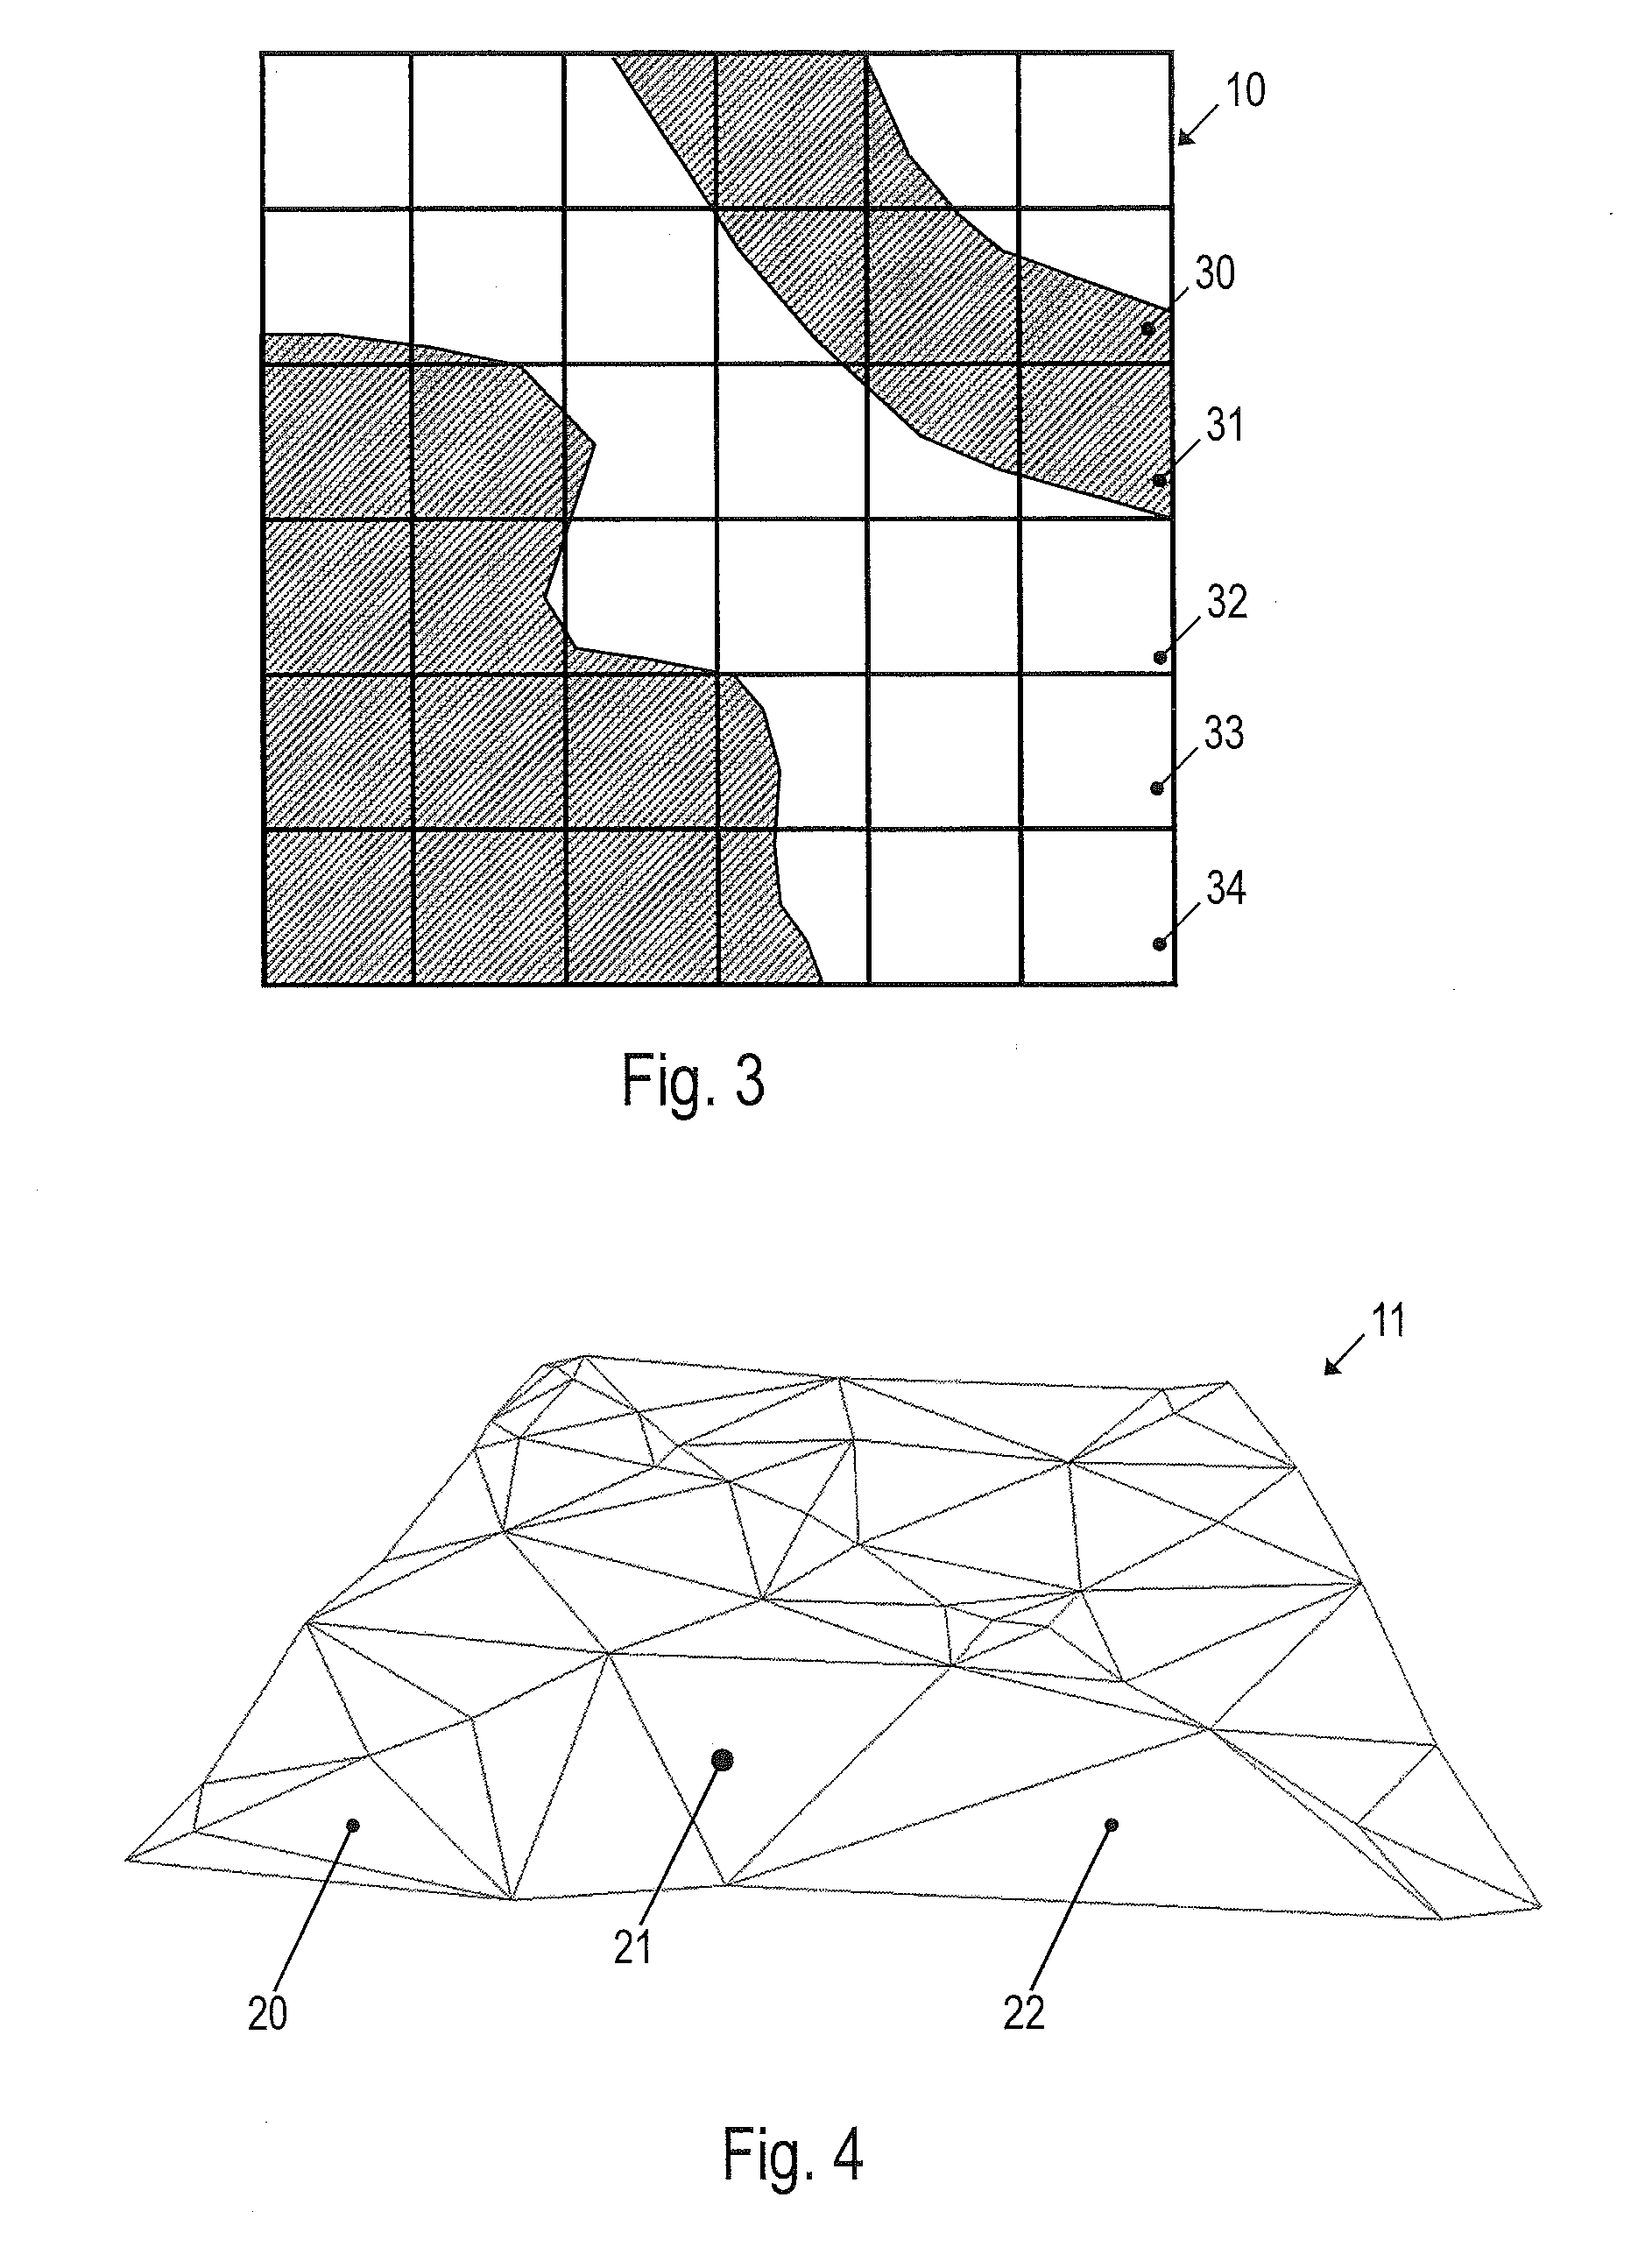 Navigation device, method of predicting a visibility of a triangular face in an electronic map view, and method for generating a database